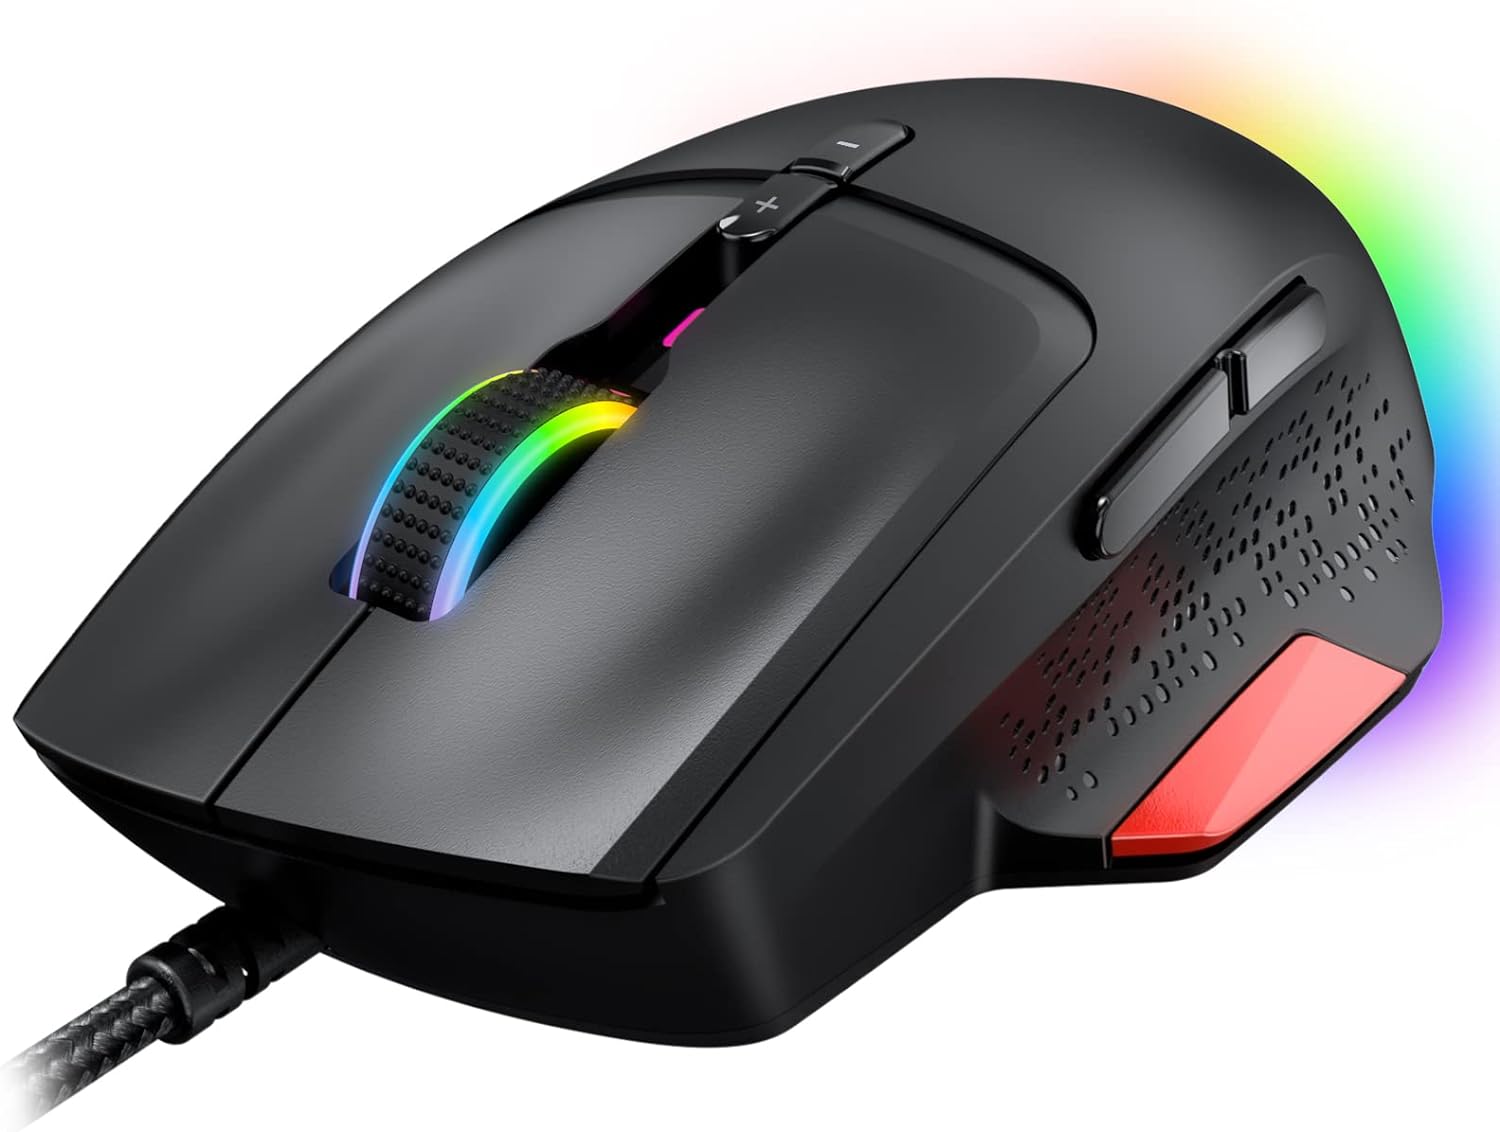 How To Specify Buttons For Mouse In Gaming Mouse On Mac